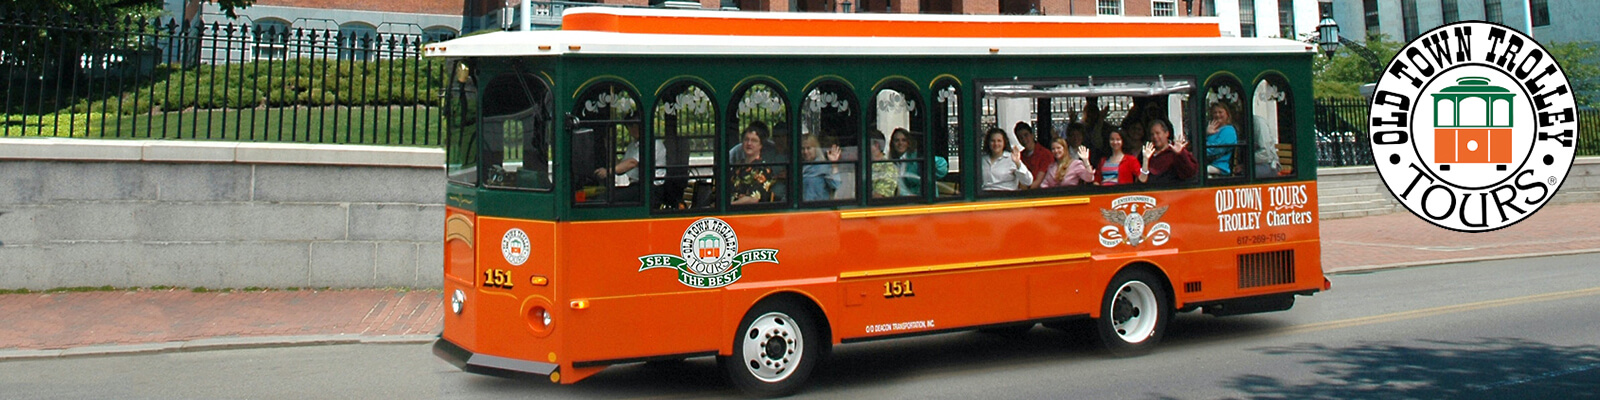 Boston Old Town Trolley City Tour Ghosts and Gravestones Combo Coupons